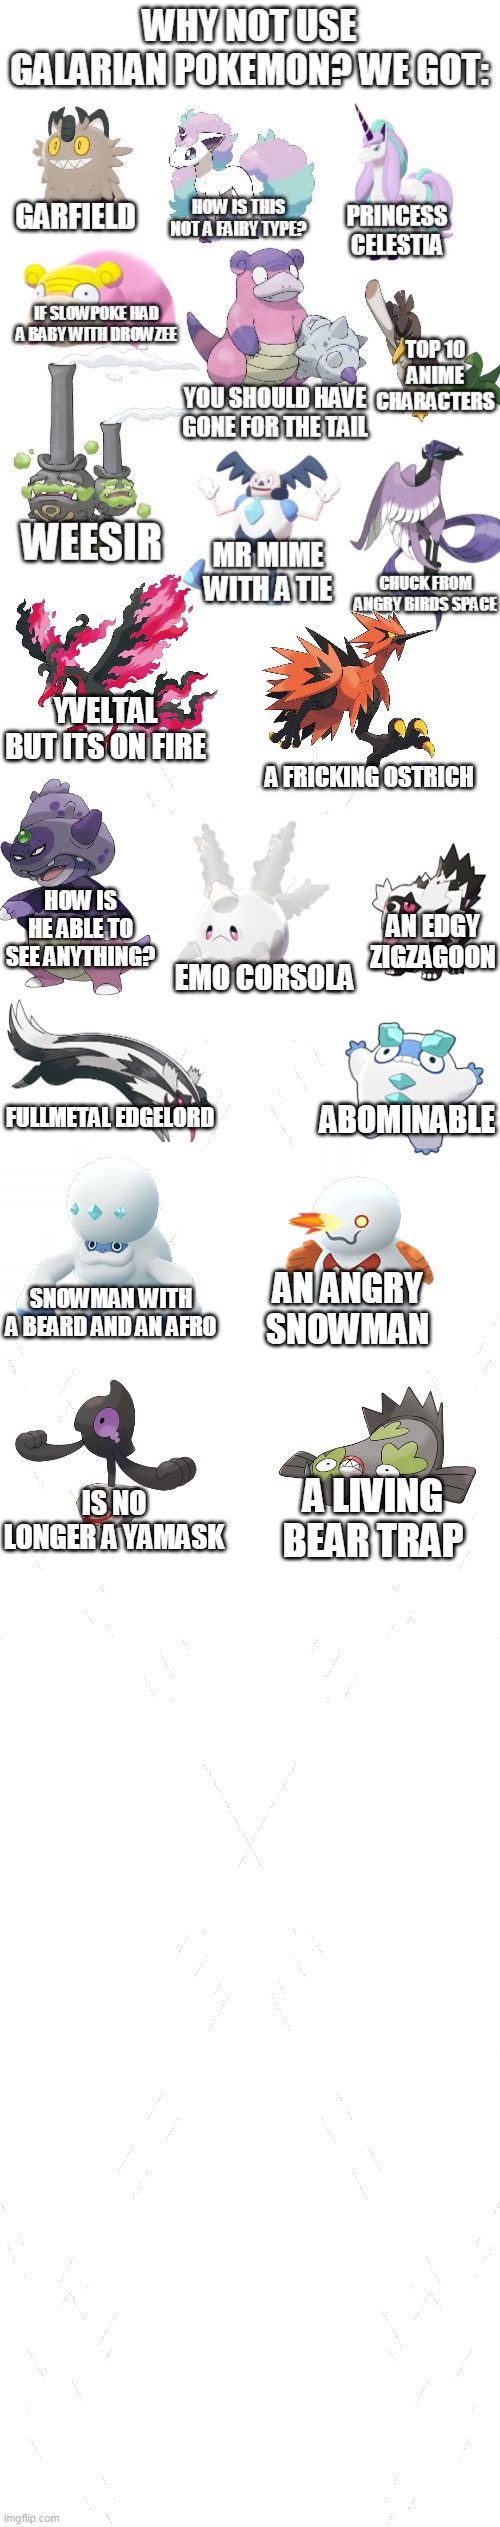 galarian pokemon be like | YVELTAL BUT ITS ON FIRE; A FRICKING OSTRICH; HOW IS HE ABLE TO SEE ANYTHING? AN EDGY ZIGZAGOON; EMO CORSOLA; ABOMINABLE; FULLMETAL EDGELORD; AN ANGRY SNOWMAN; SNOWMAN WITH A BEARD AND AN AFRO; IS NO LONGER A YAMASK; A LIVING BEAR TRAP | image tagged in memes,funny,pokemon | made w/ Imgflip meme maker